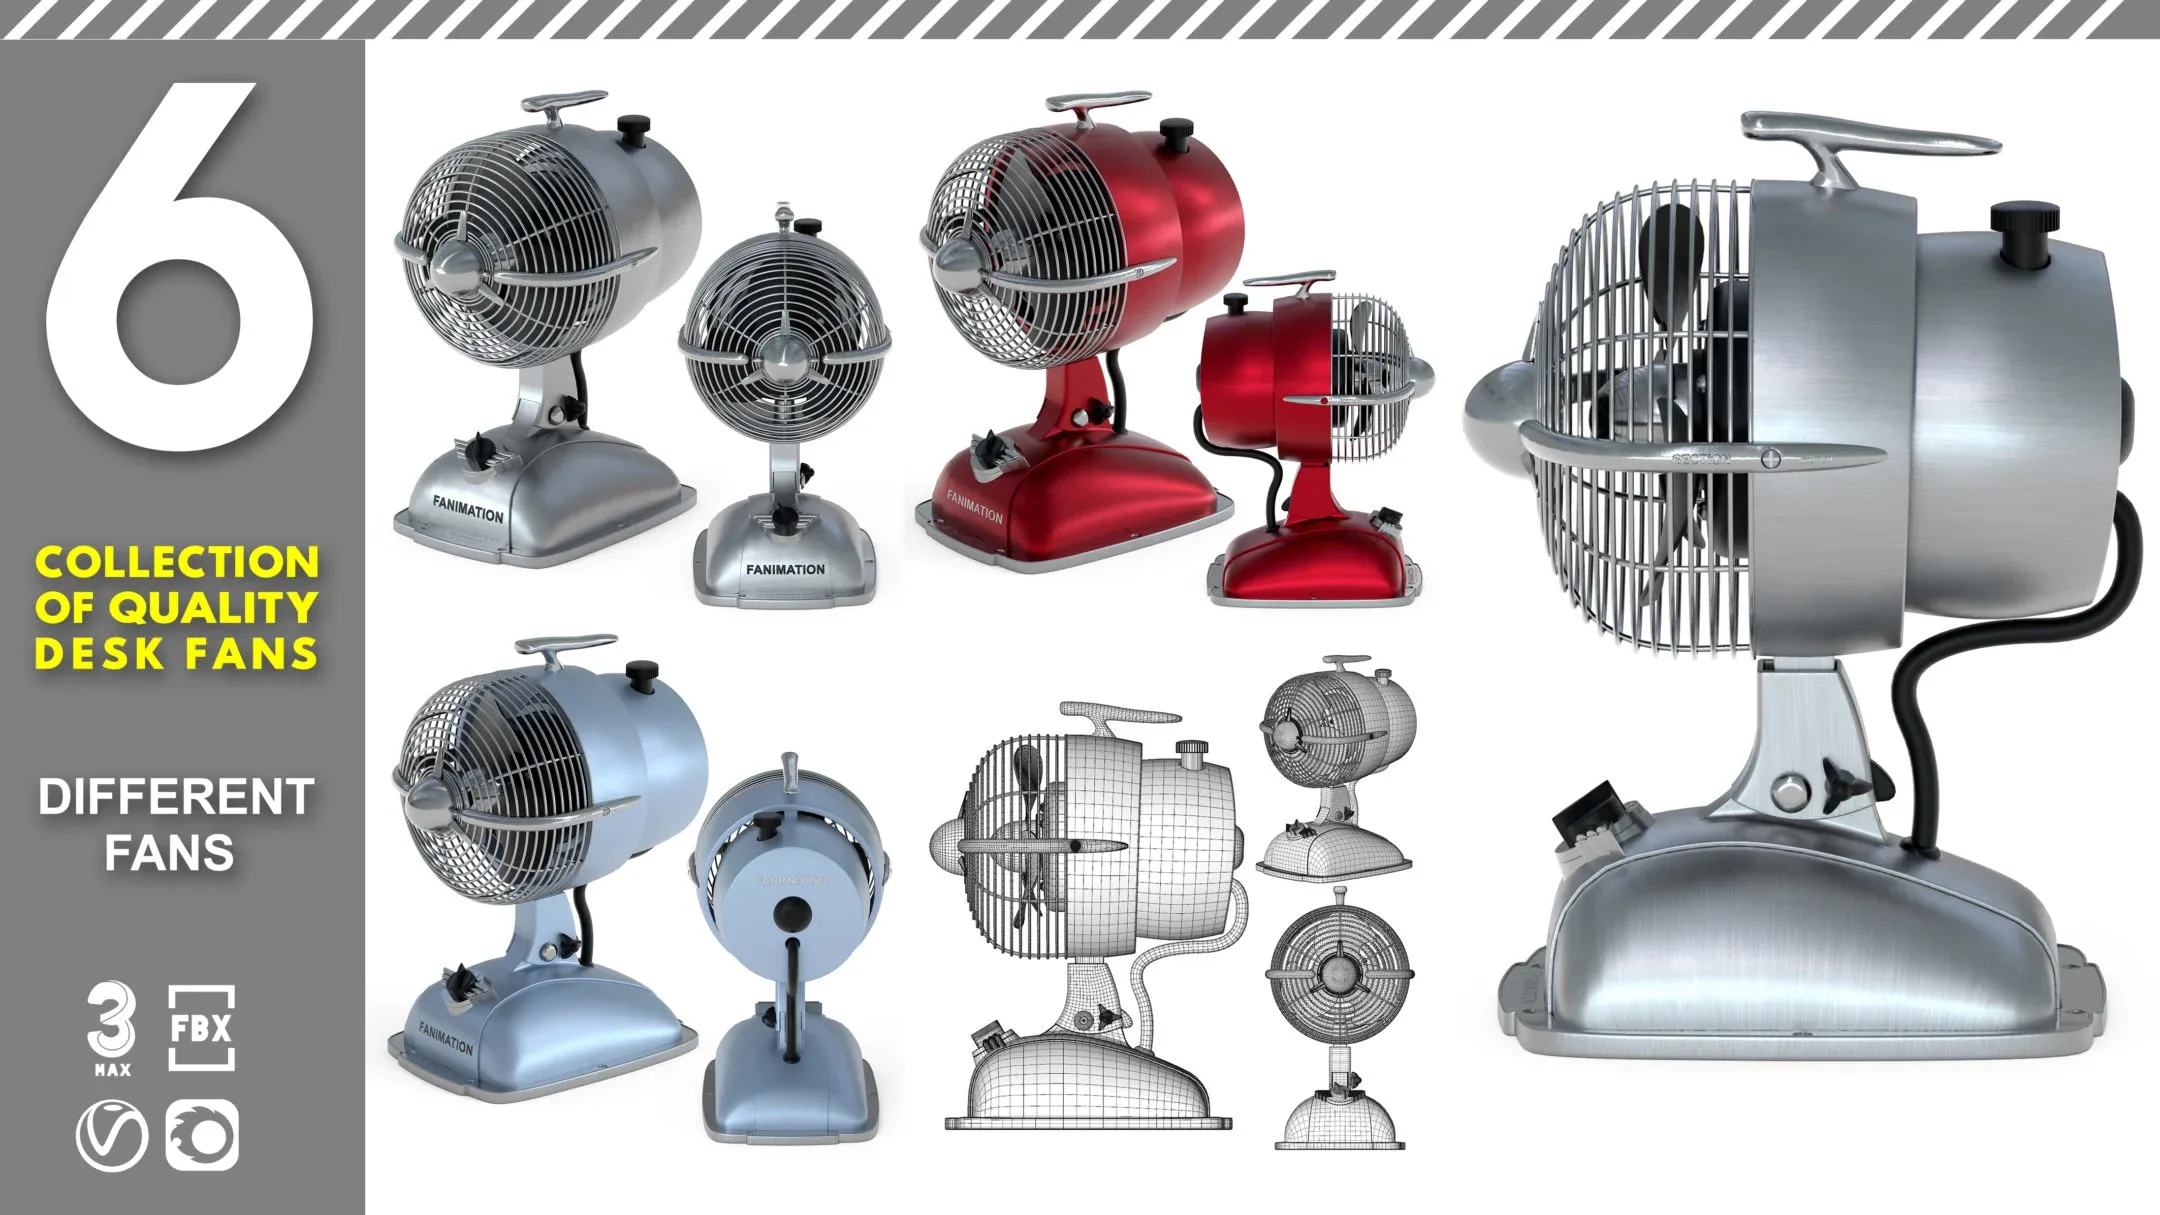 6 collection of quality desk fans